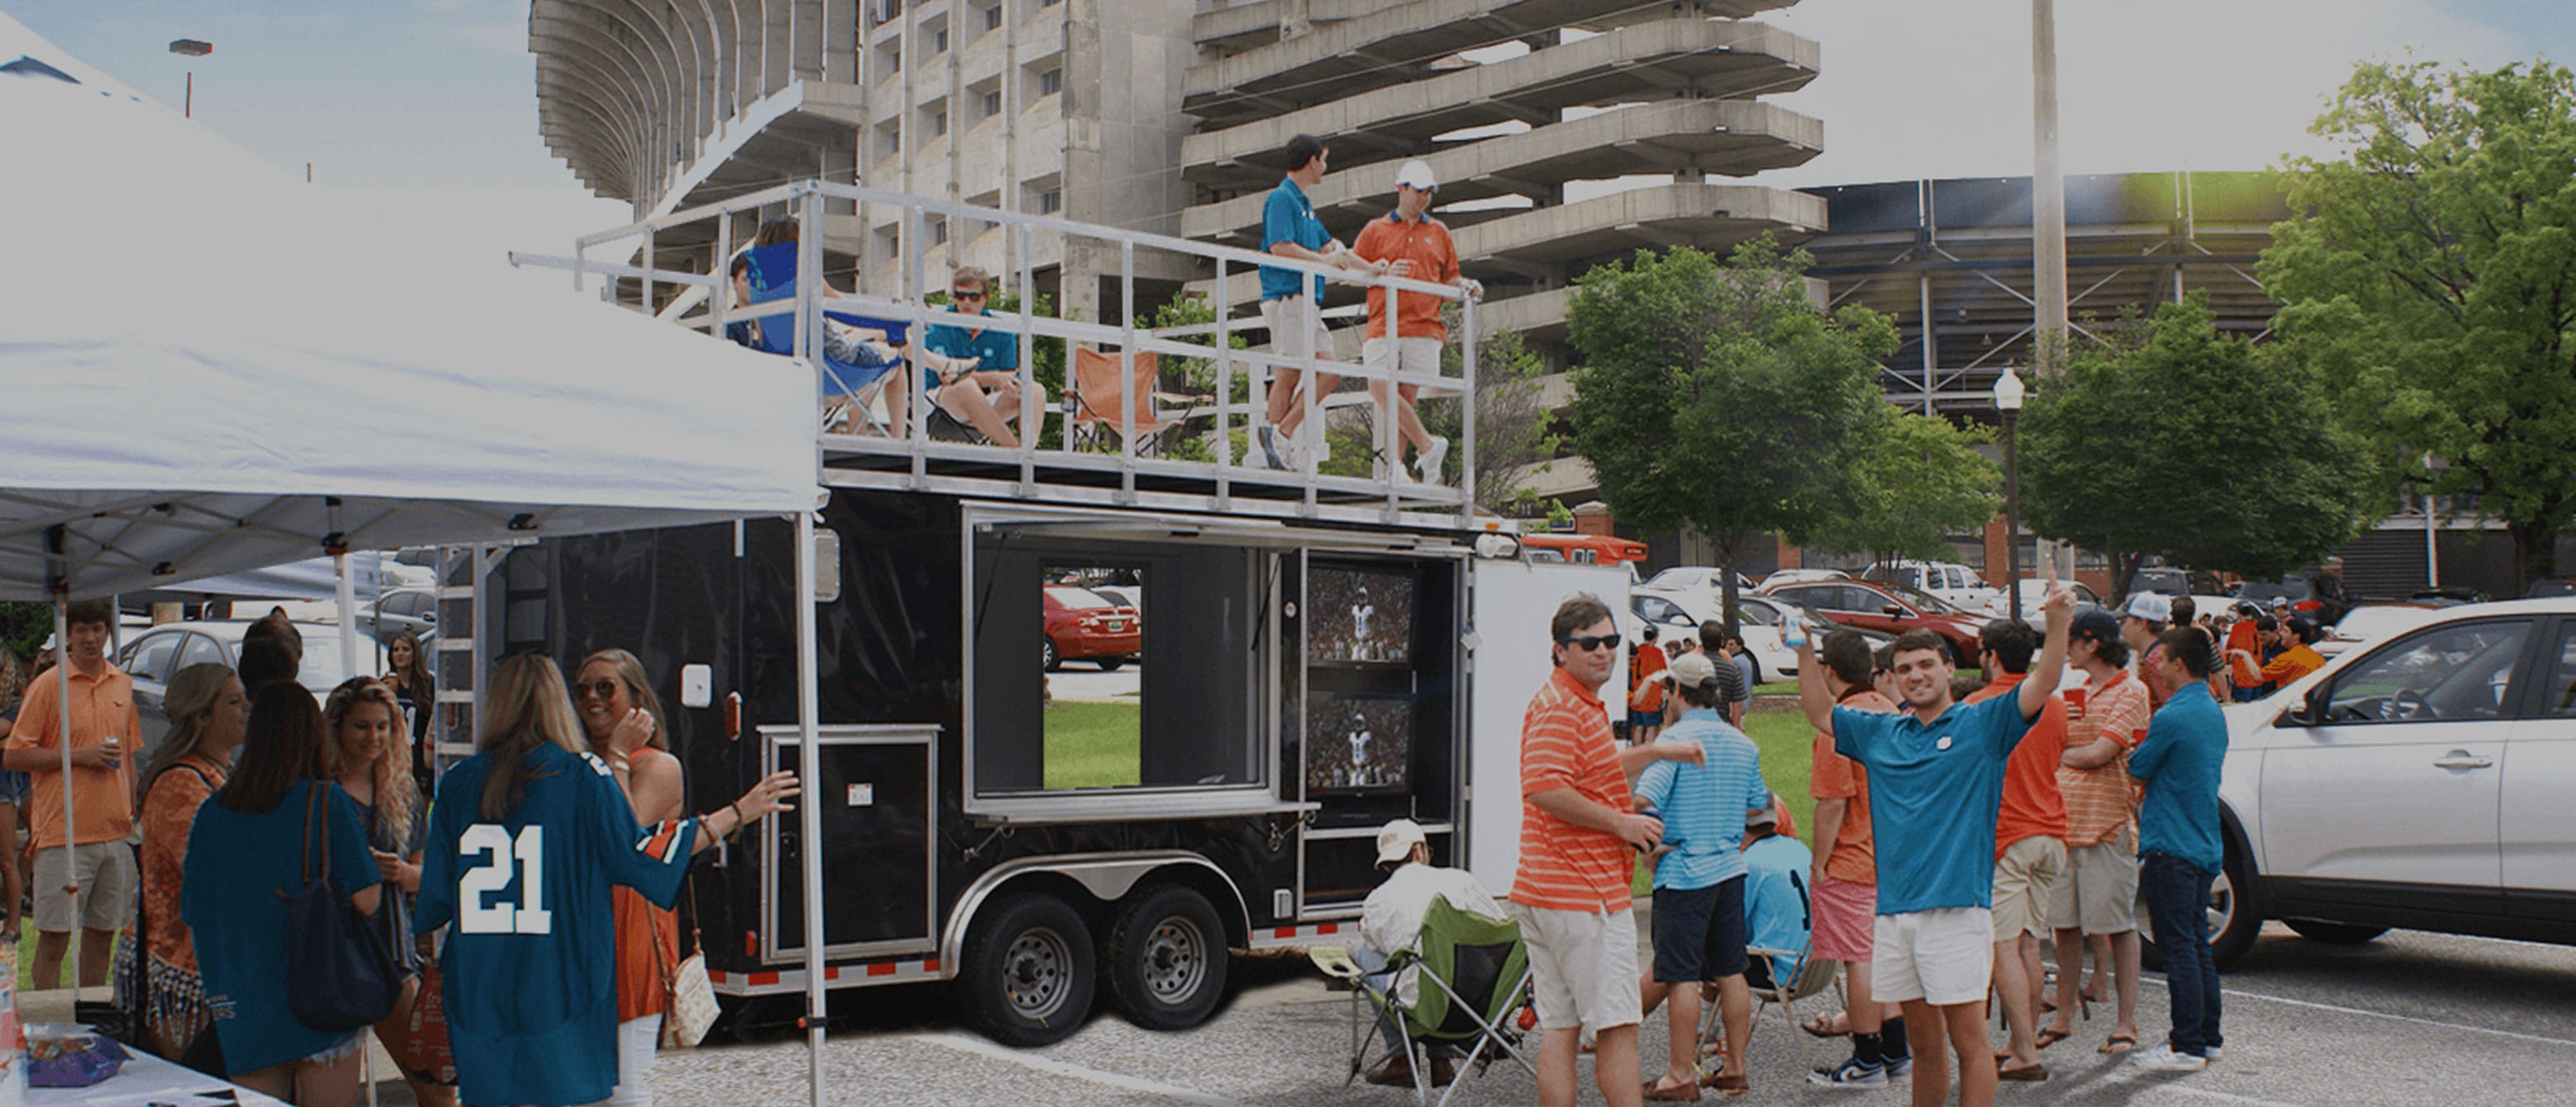 event-tailgating-services-tailgate-trailer-rentals